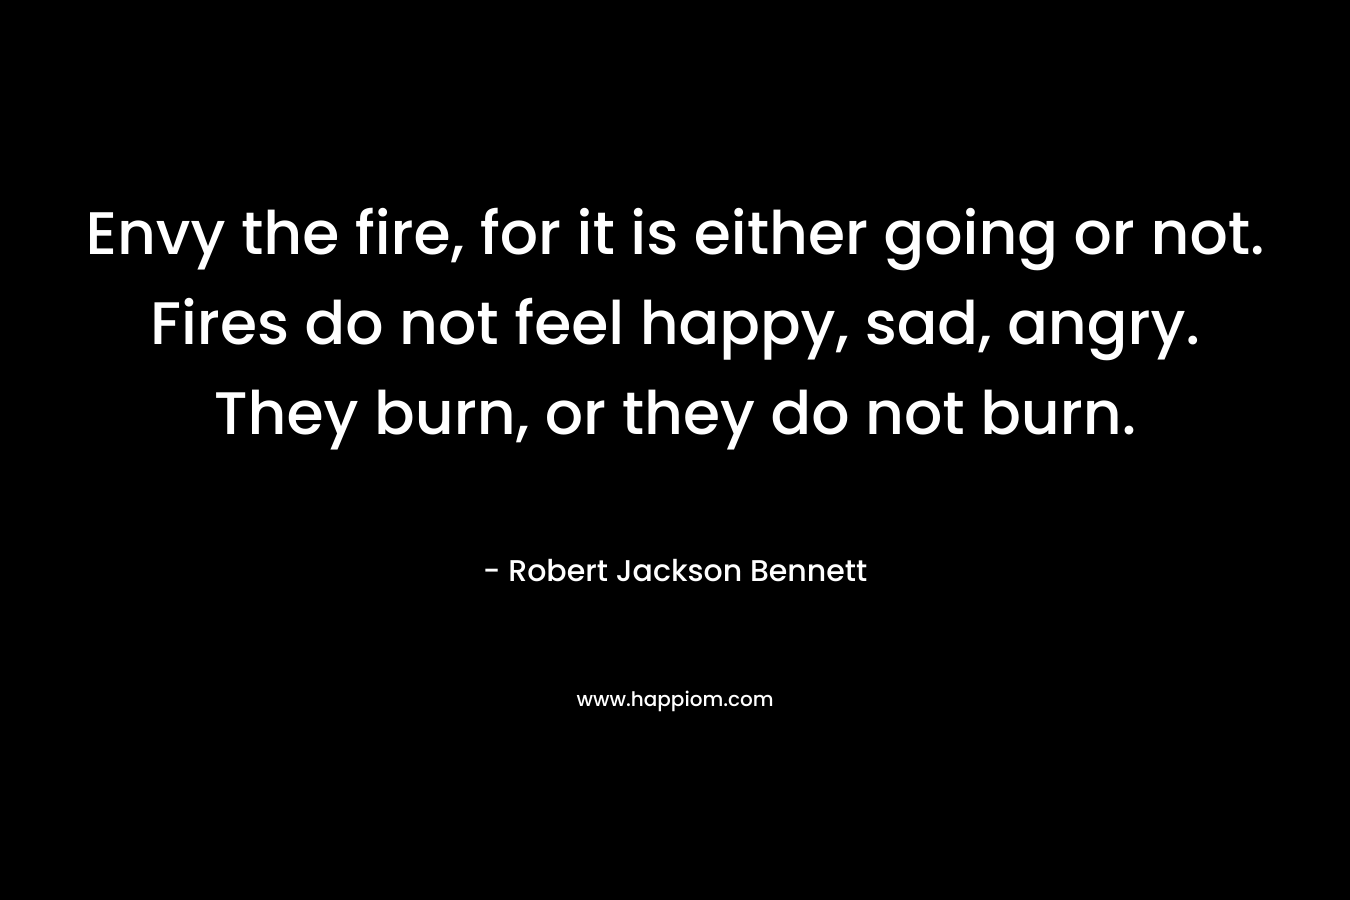 Envy the fire, for it is either going or not. Fires do not feel happy, sad, angry. They burn, or they do not burn. – Robert Jackson Bennett